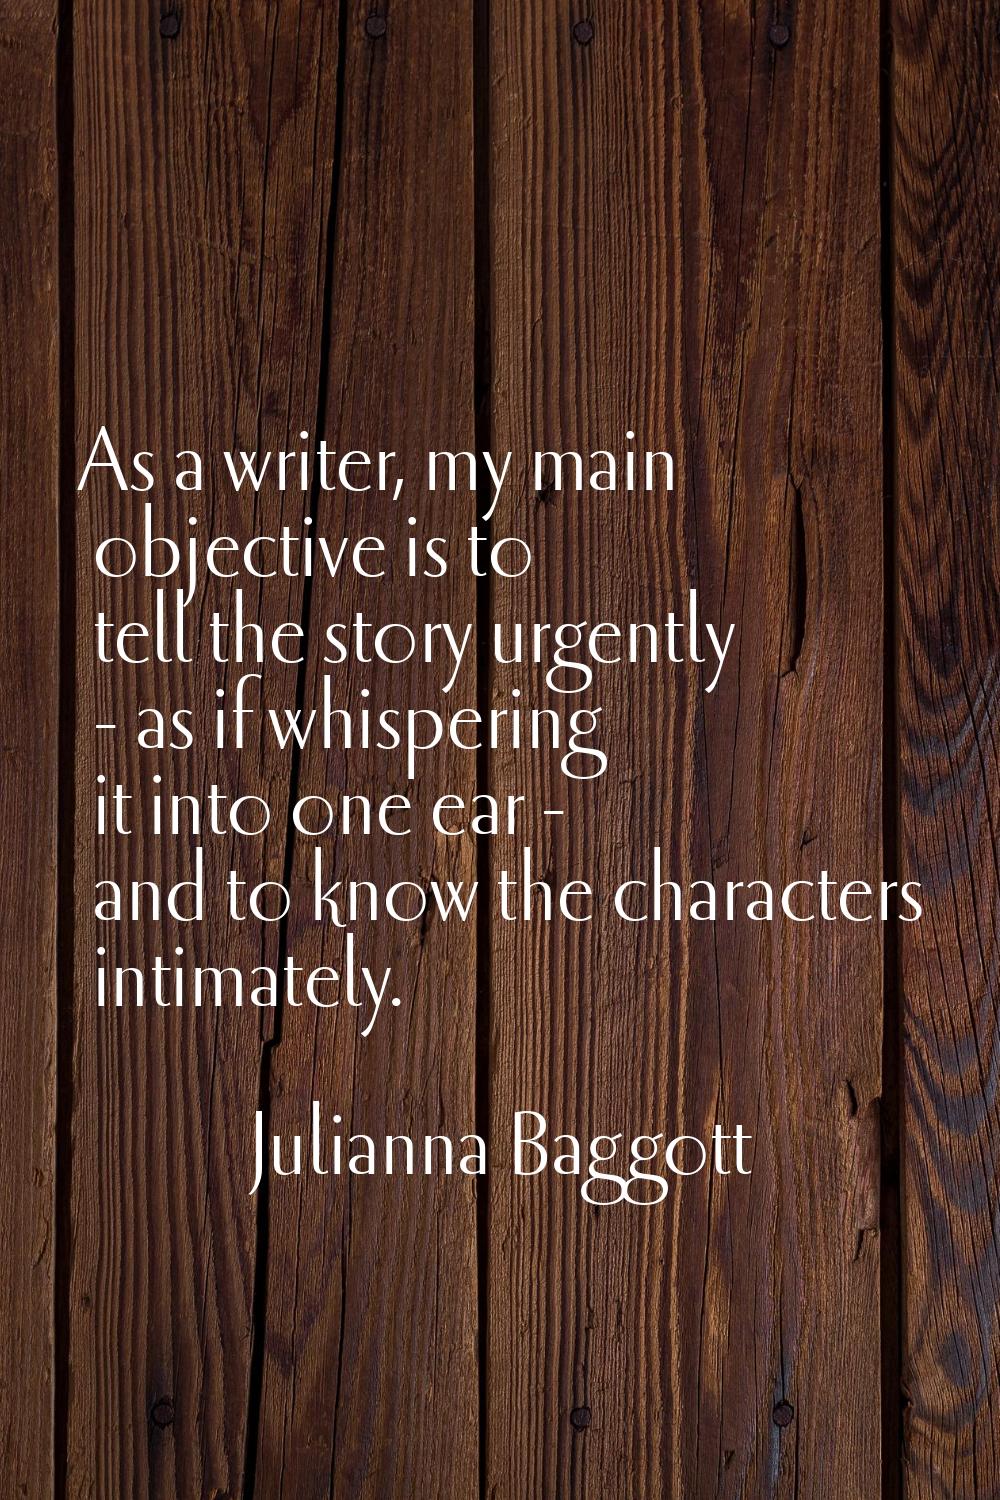 As a writer, my main objective is to tell the story urgently - as if whispering it into one ear - a